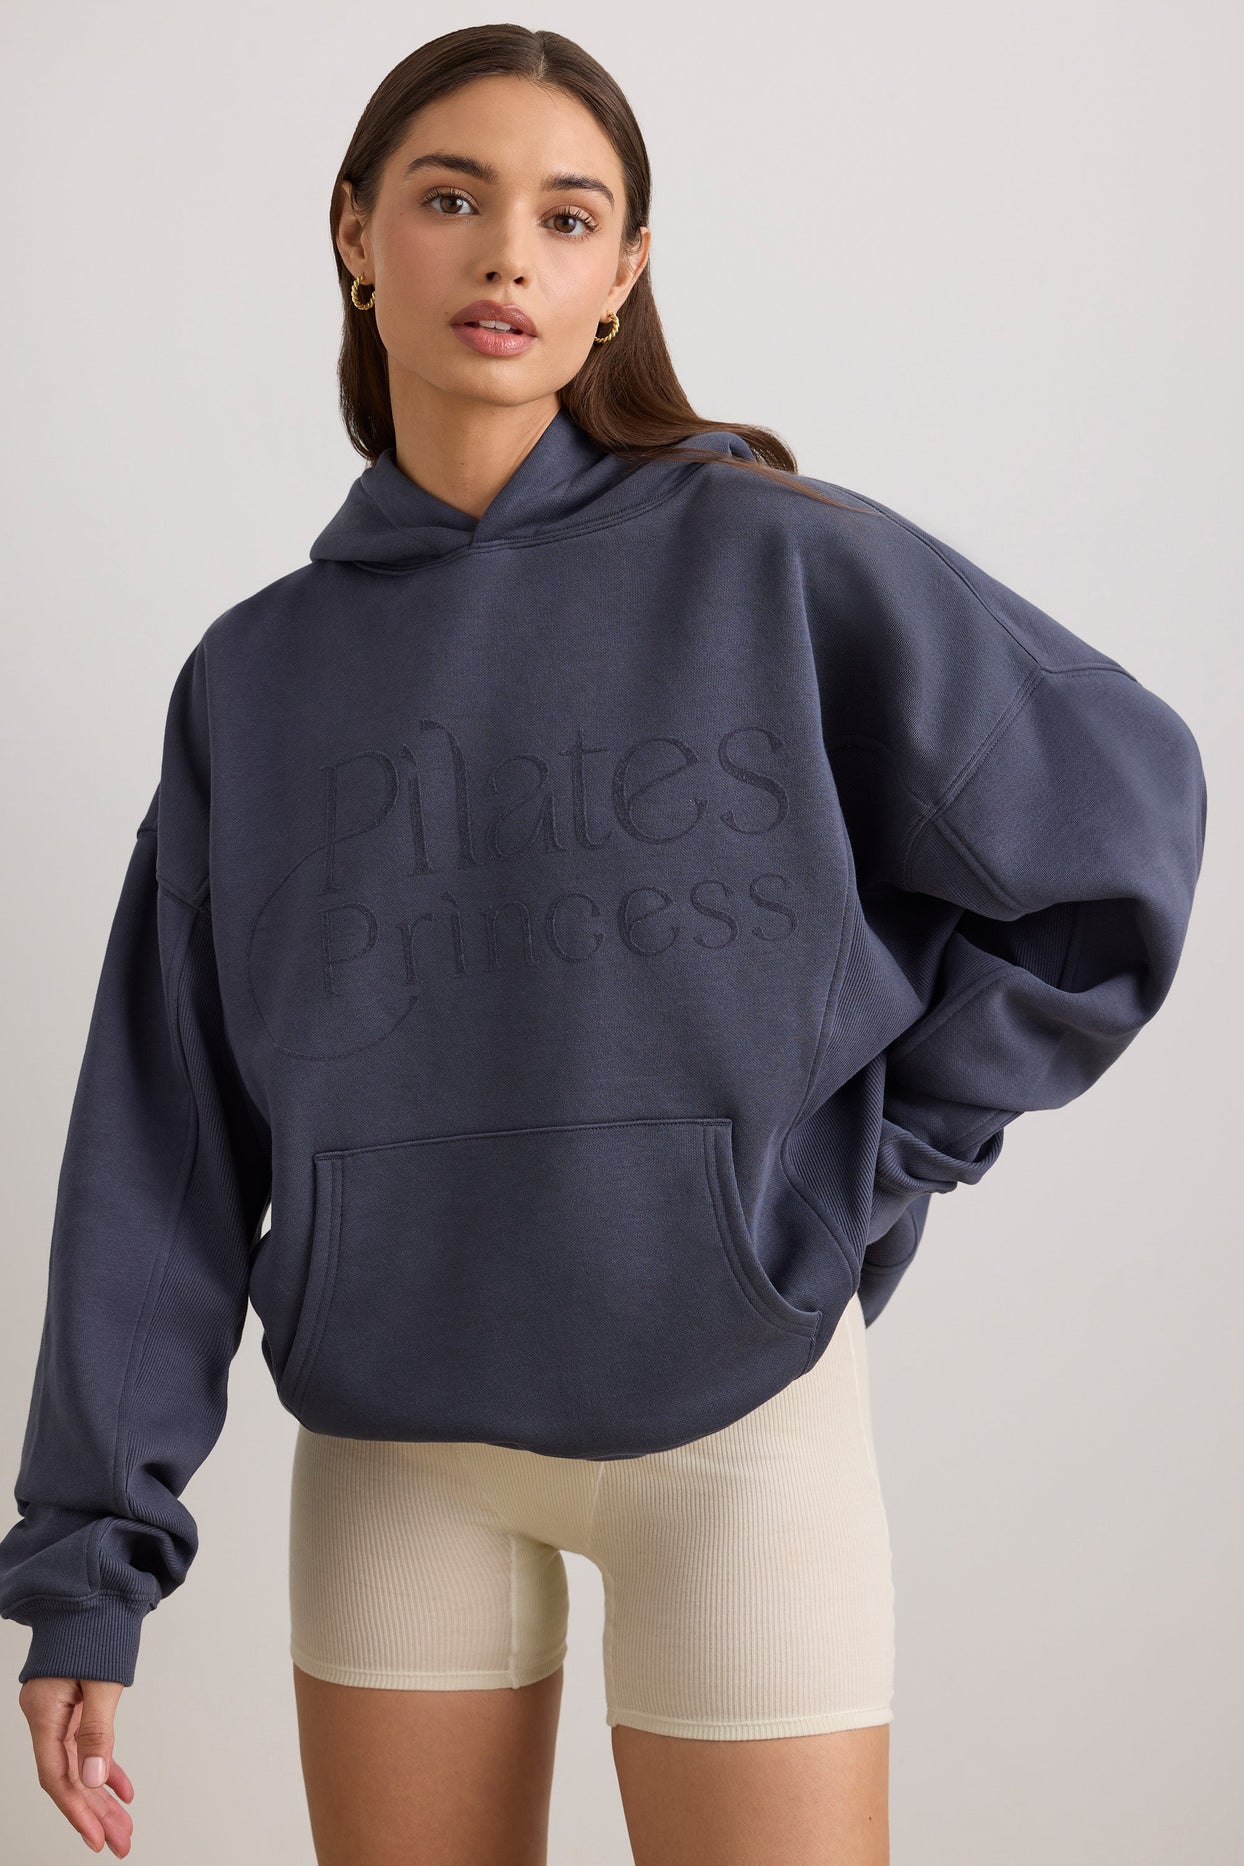 Pilates Princess Oversized Hooded Sweatshirt in Slate | Oh Polly